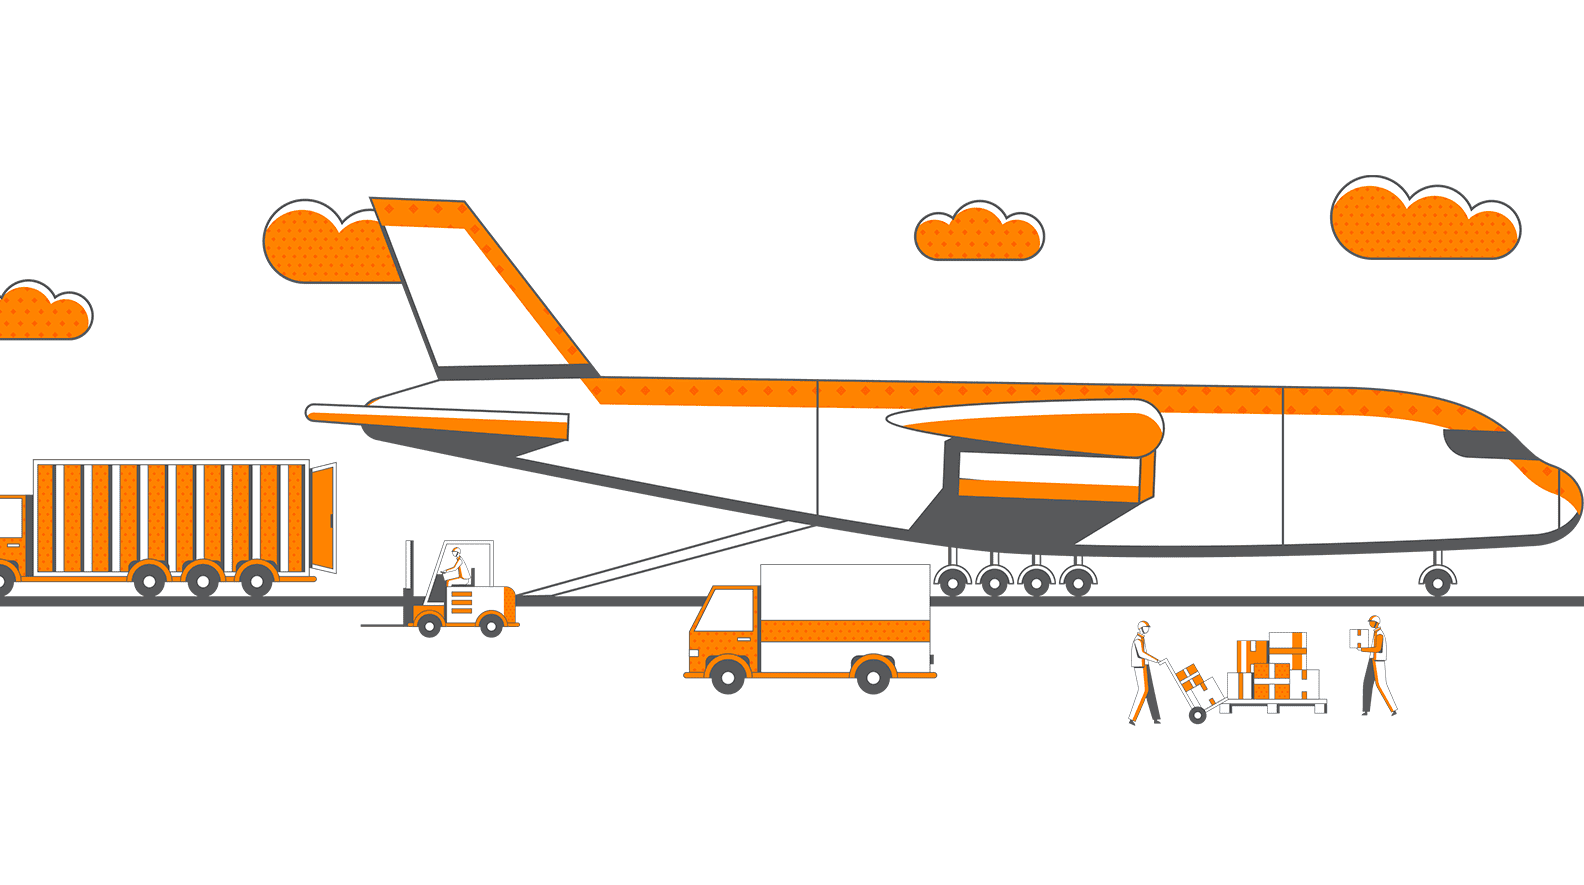 An illustration of delivery trucks and personnel offloading cargo from a plane highlights end-to-end concepts covered in the master’s in supply chain management curriculum.